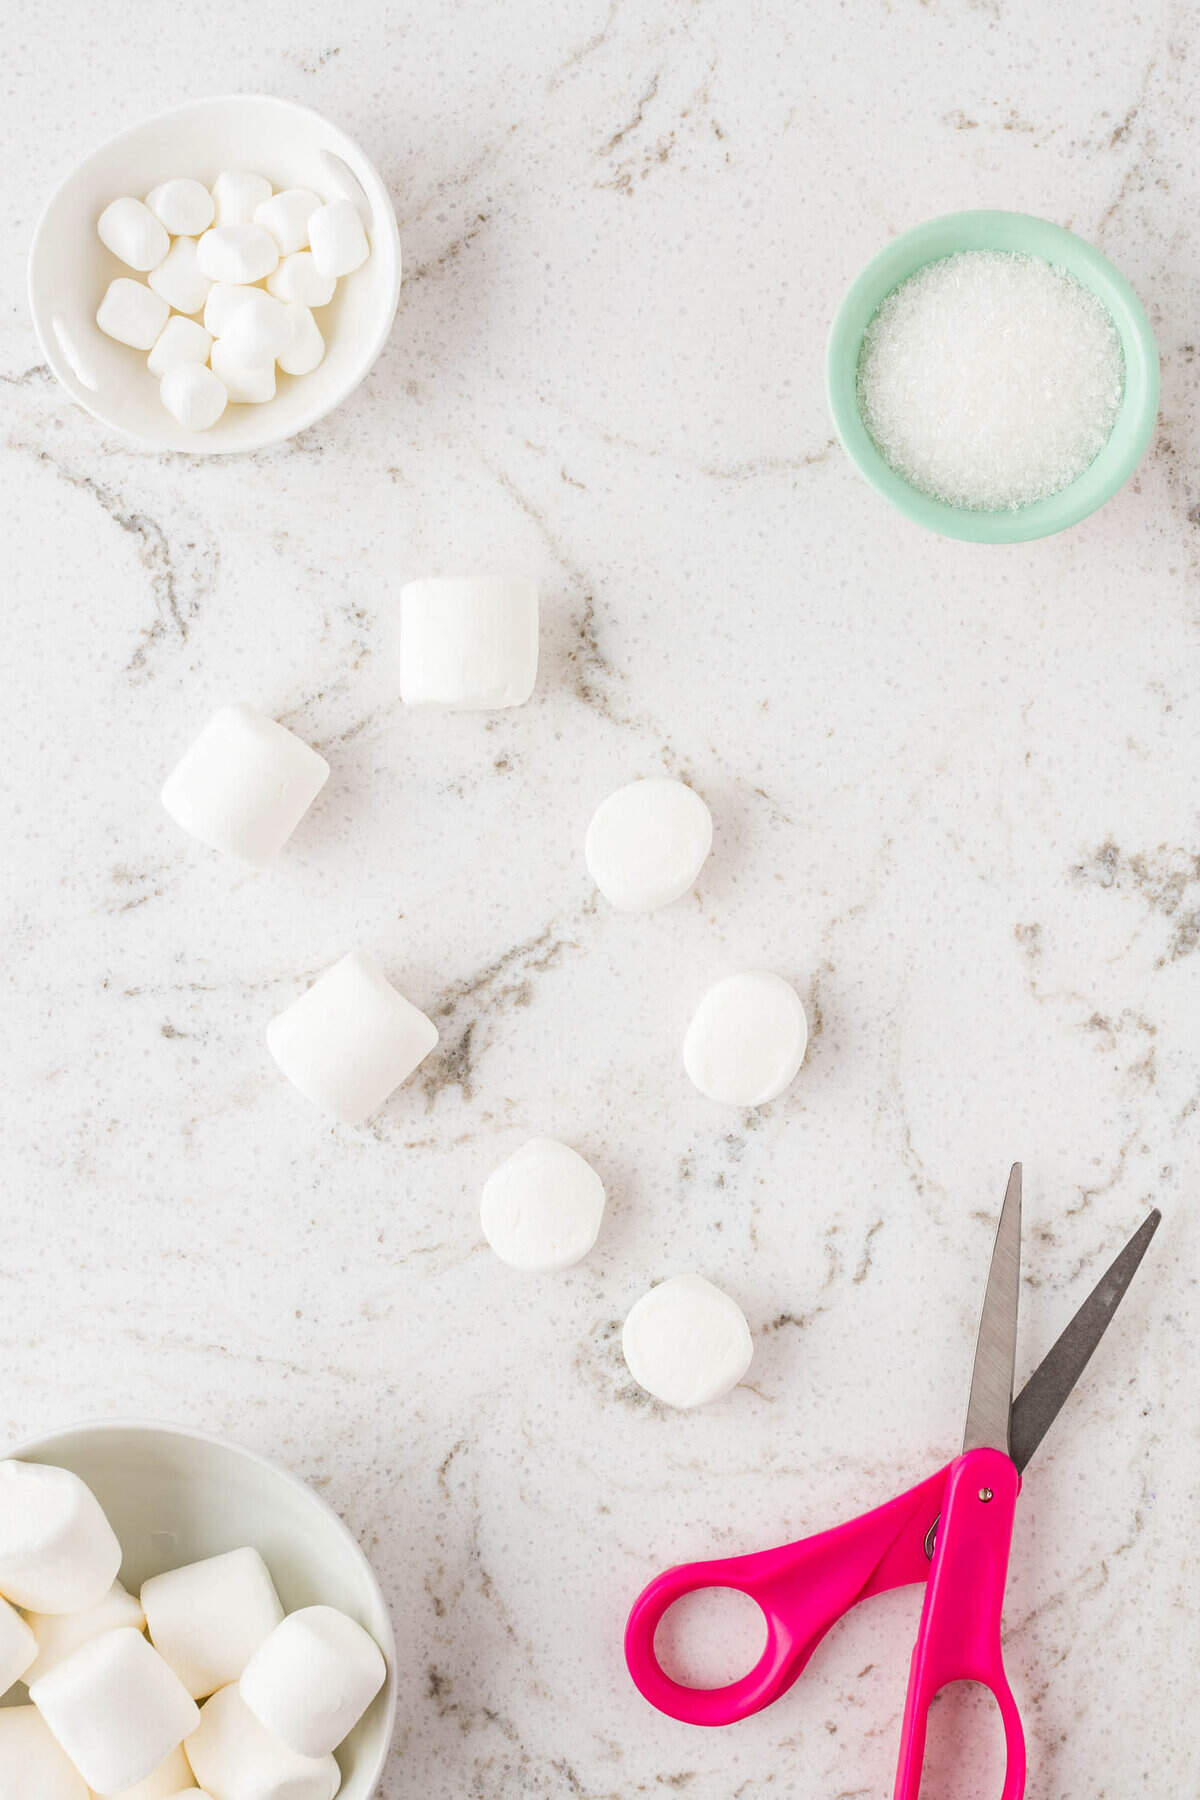 Cut each of the large marshmallows in half.